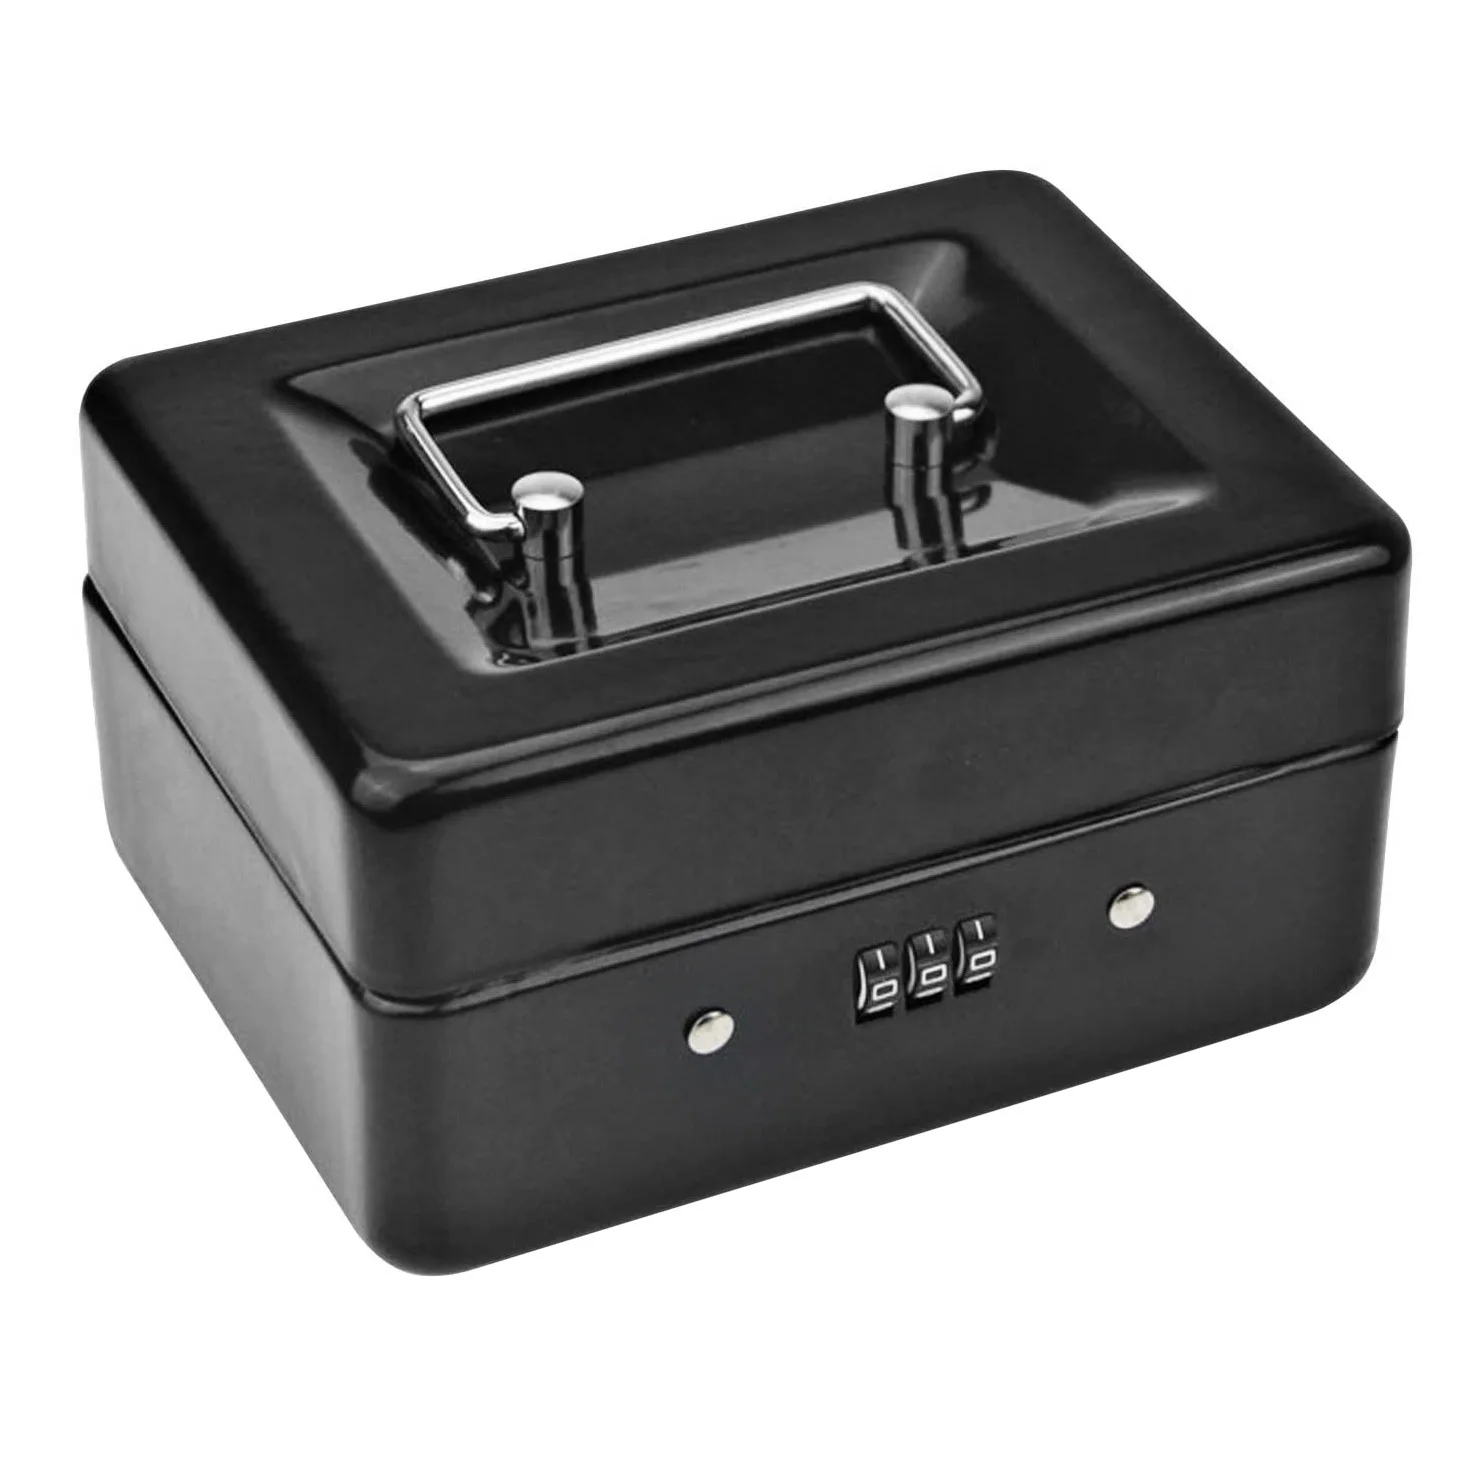 

Durable Metal Coin Box with Locking Storage Tray - Small Coin Box with Combination Lock 15 x 12 x 7.7cm (Black)